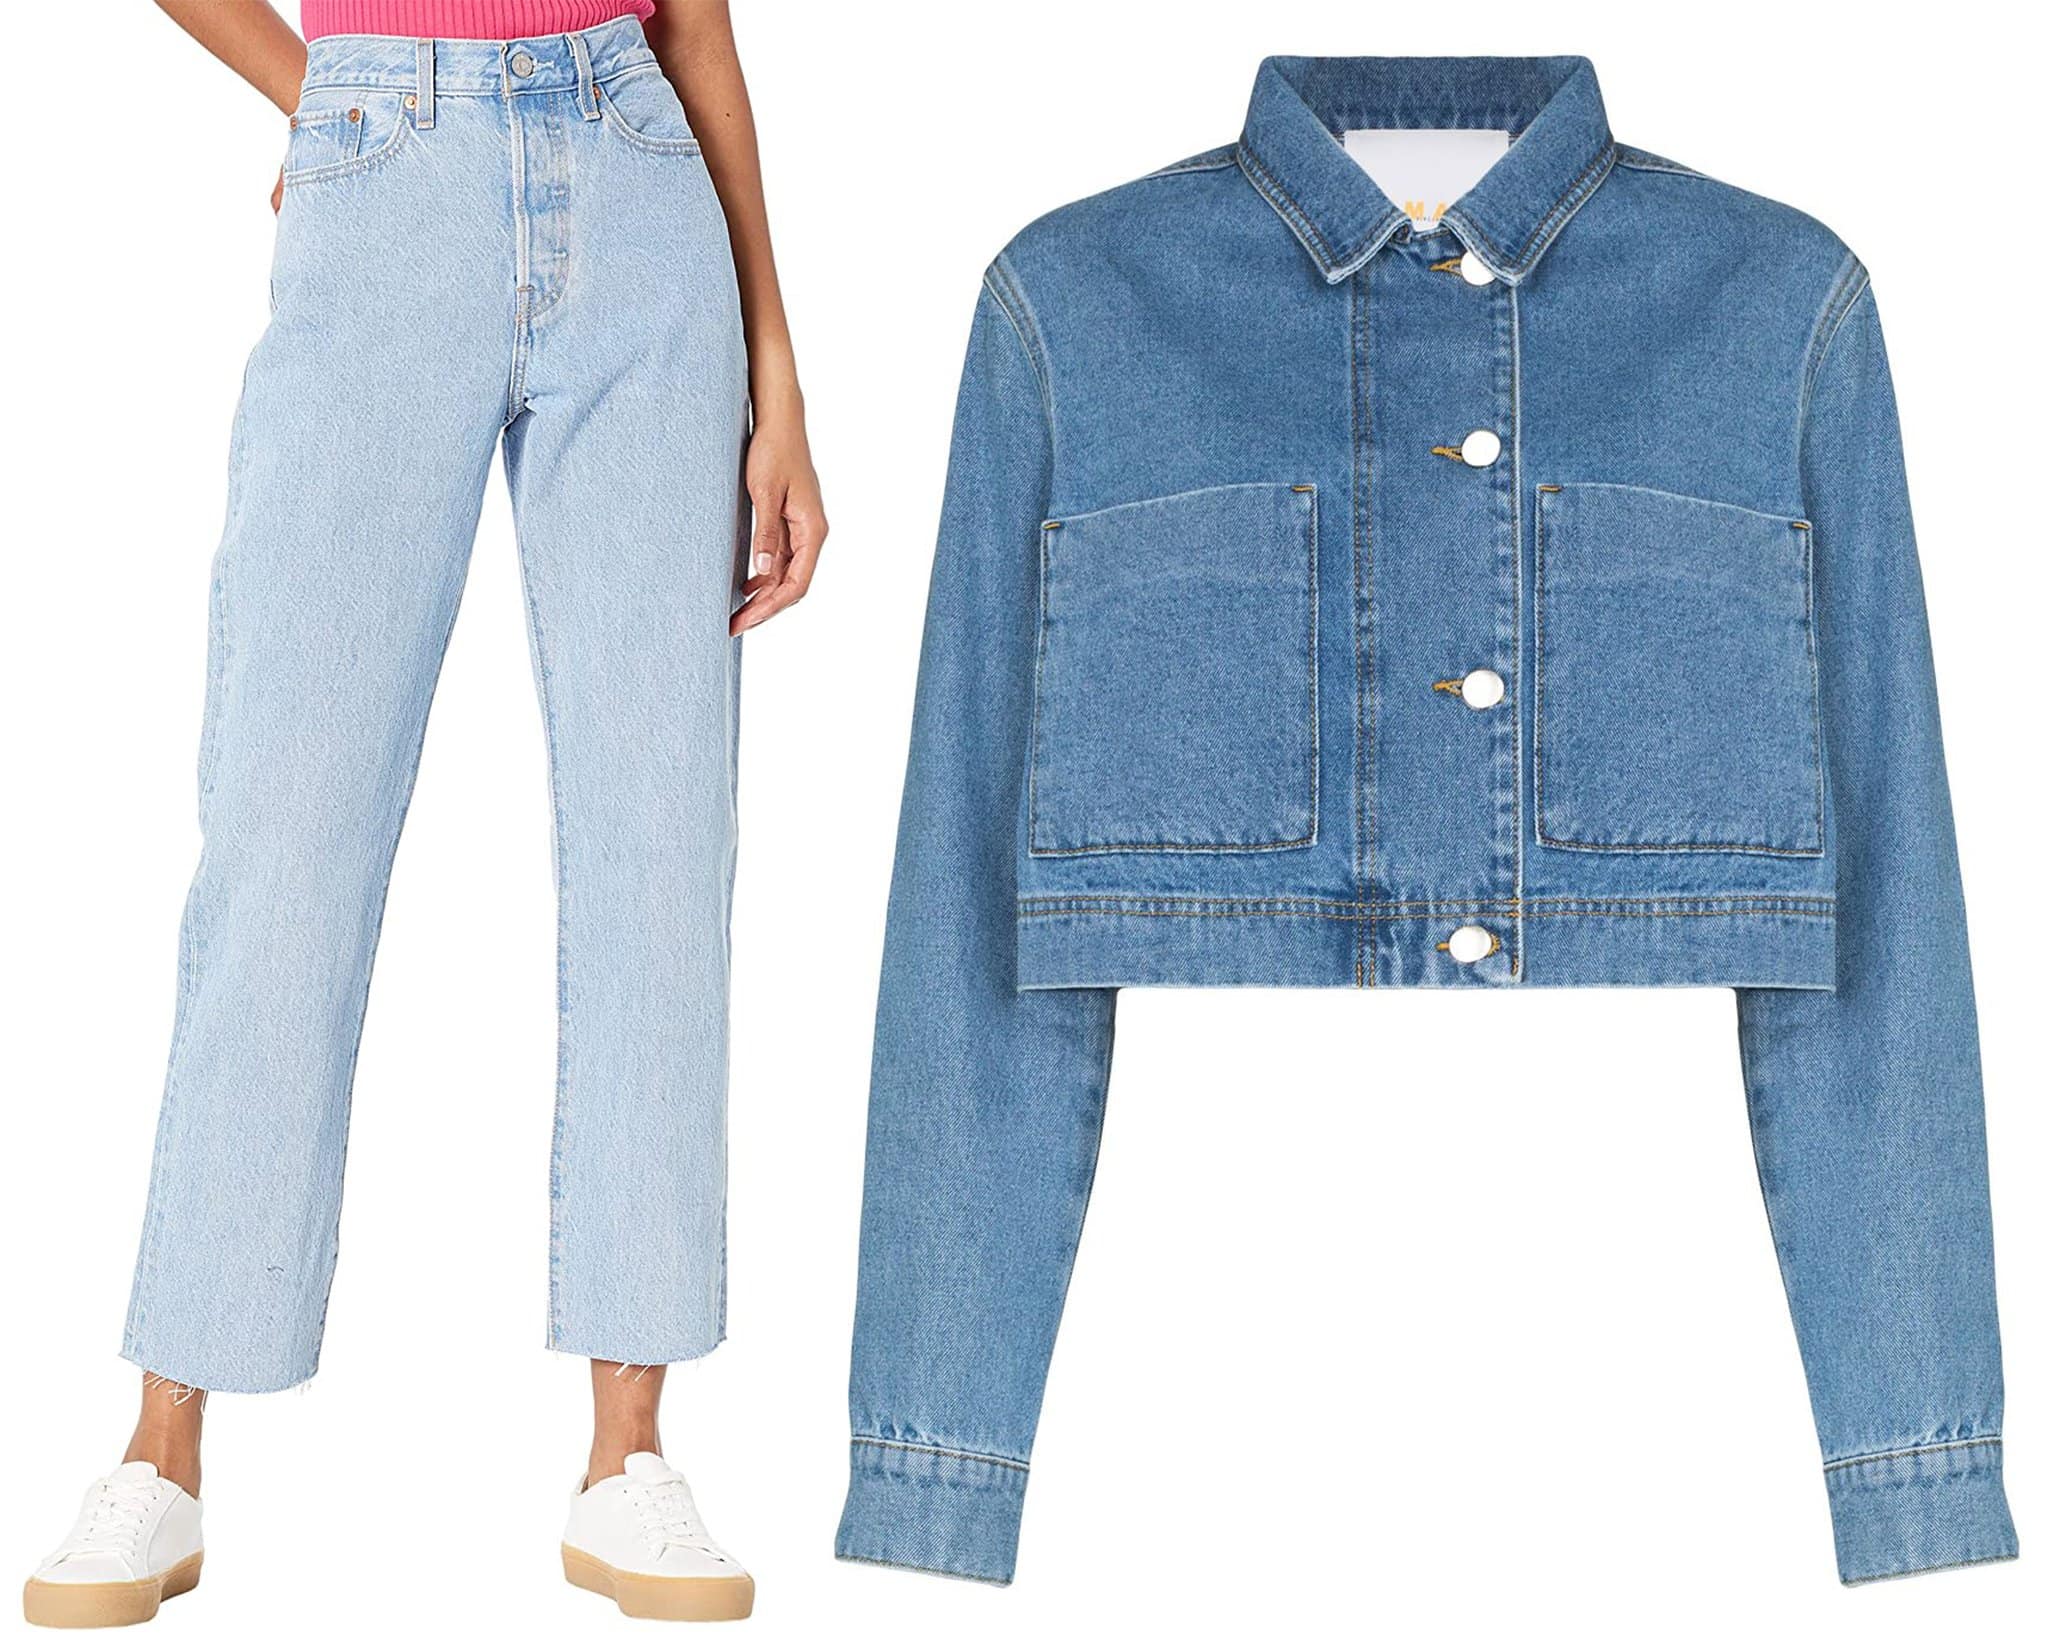 Curve Accentuating Ensemble: Levi's® Premium Wedgie Straight Jeans teamed with Remain's Mariona Cropped Denim Jacket, a perfect example of how light denim shades can enhance and celebrate natural curves